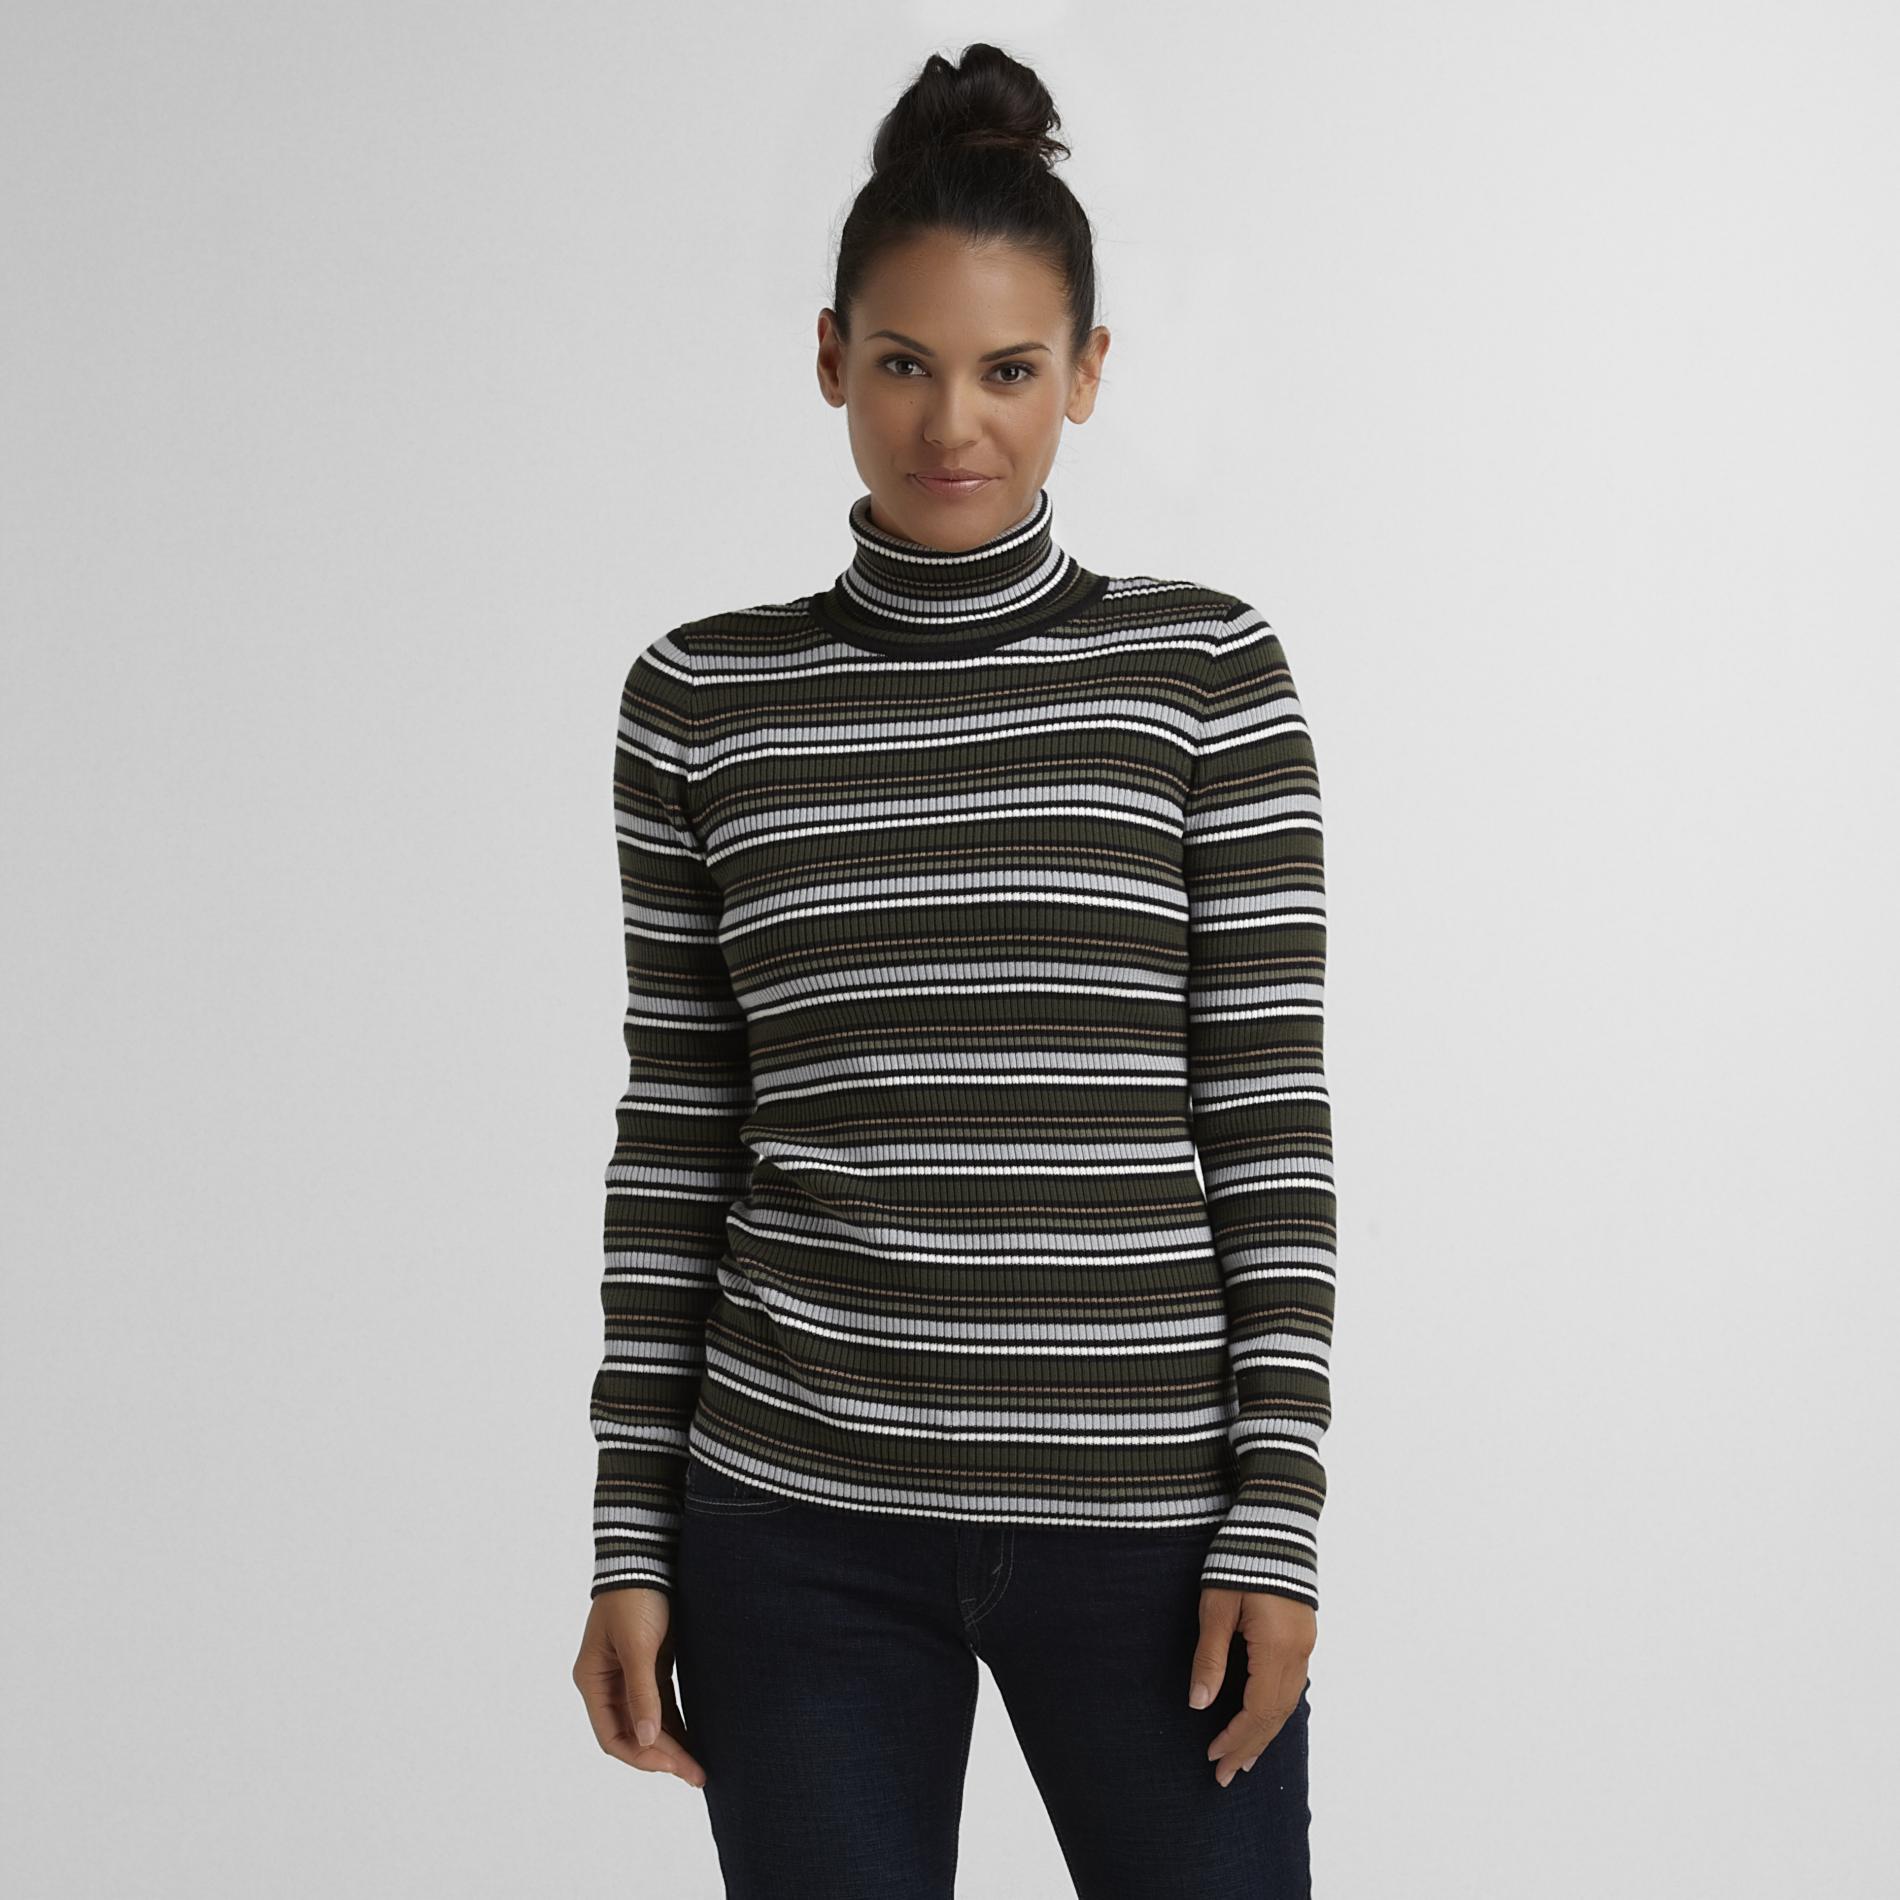 Basic Editions Women's Ribbed Knit Turtleneck - Striped